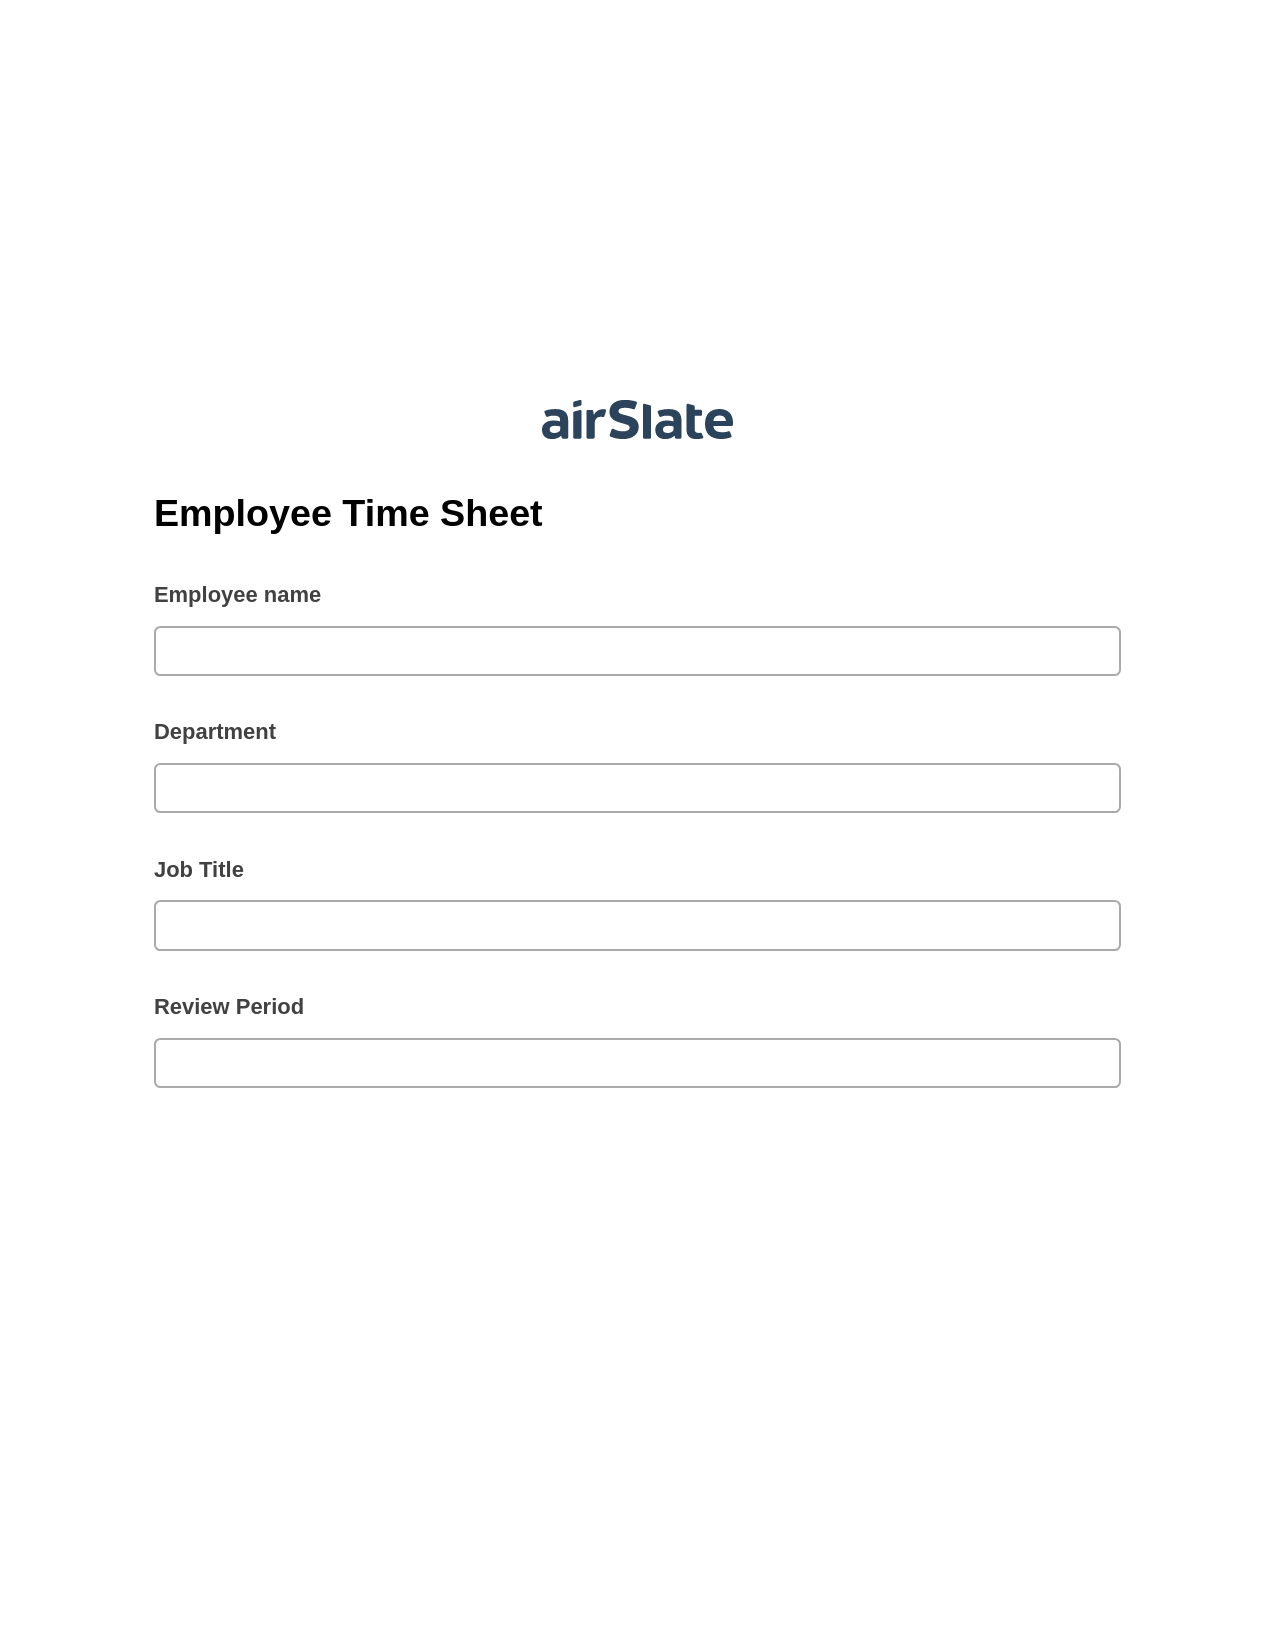 Multirole Employee Time Sheet Prefill from NetSuite records, Create Salesforce Records Bot, Export to Salesforce Record Bot